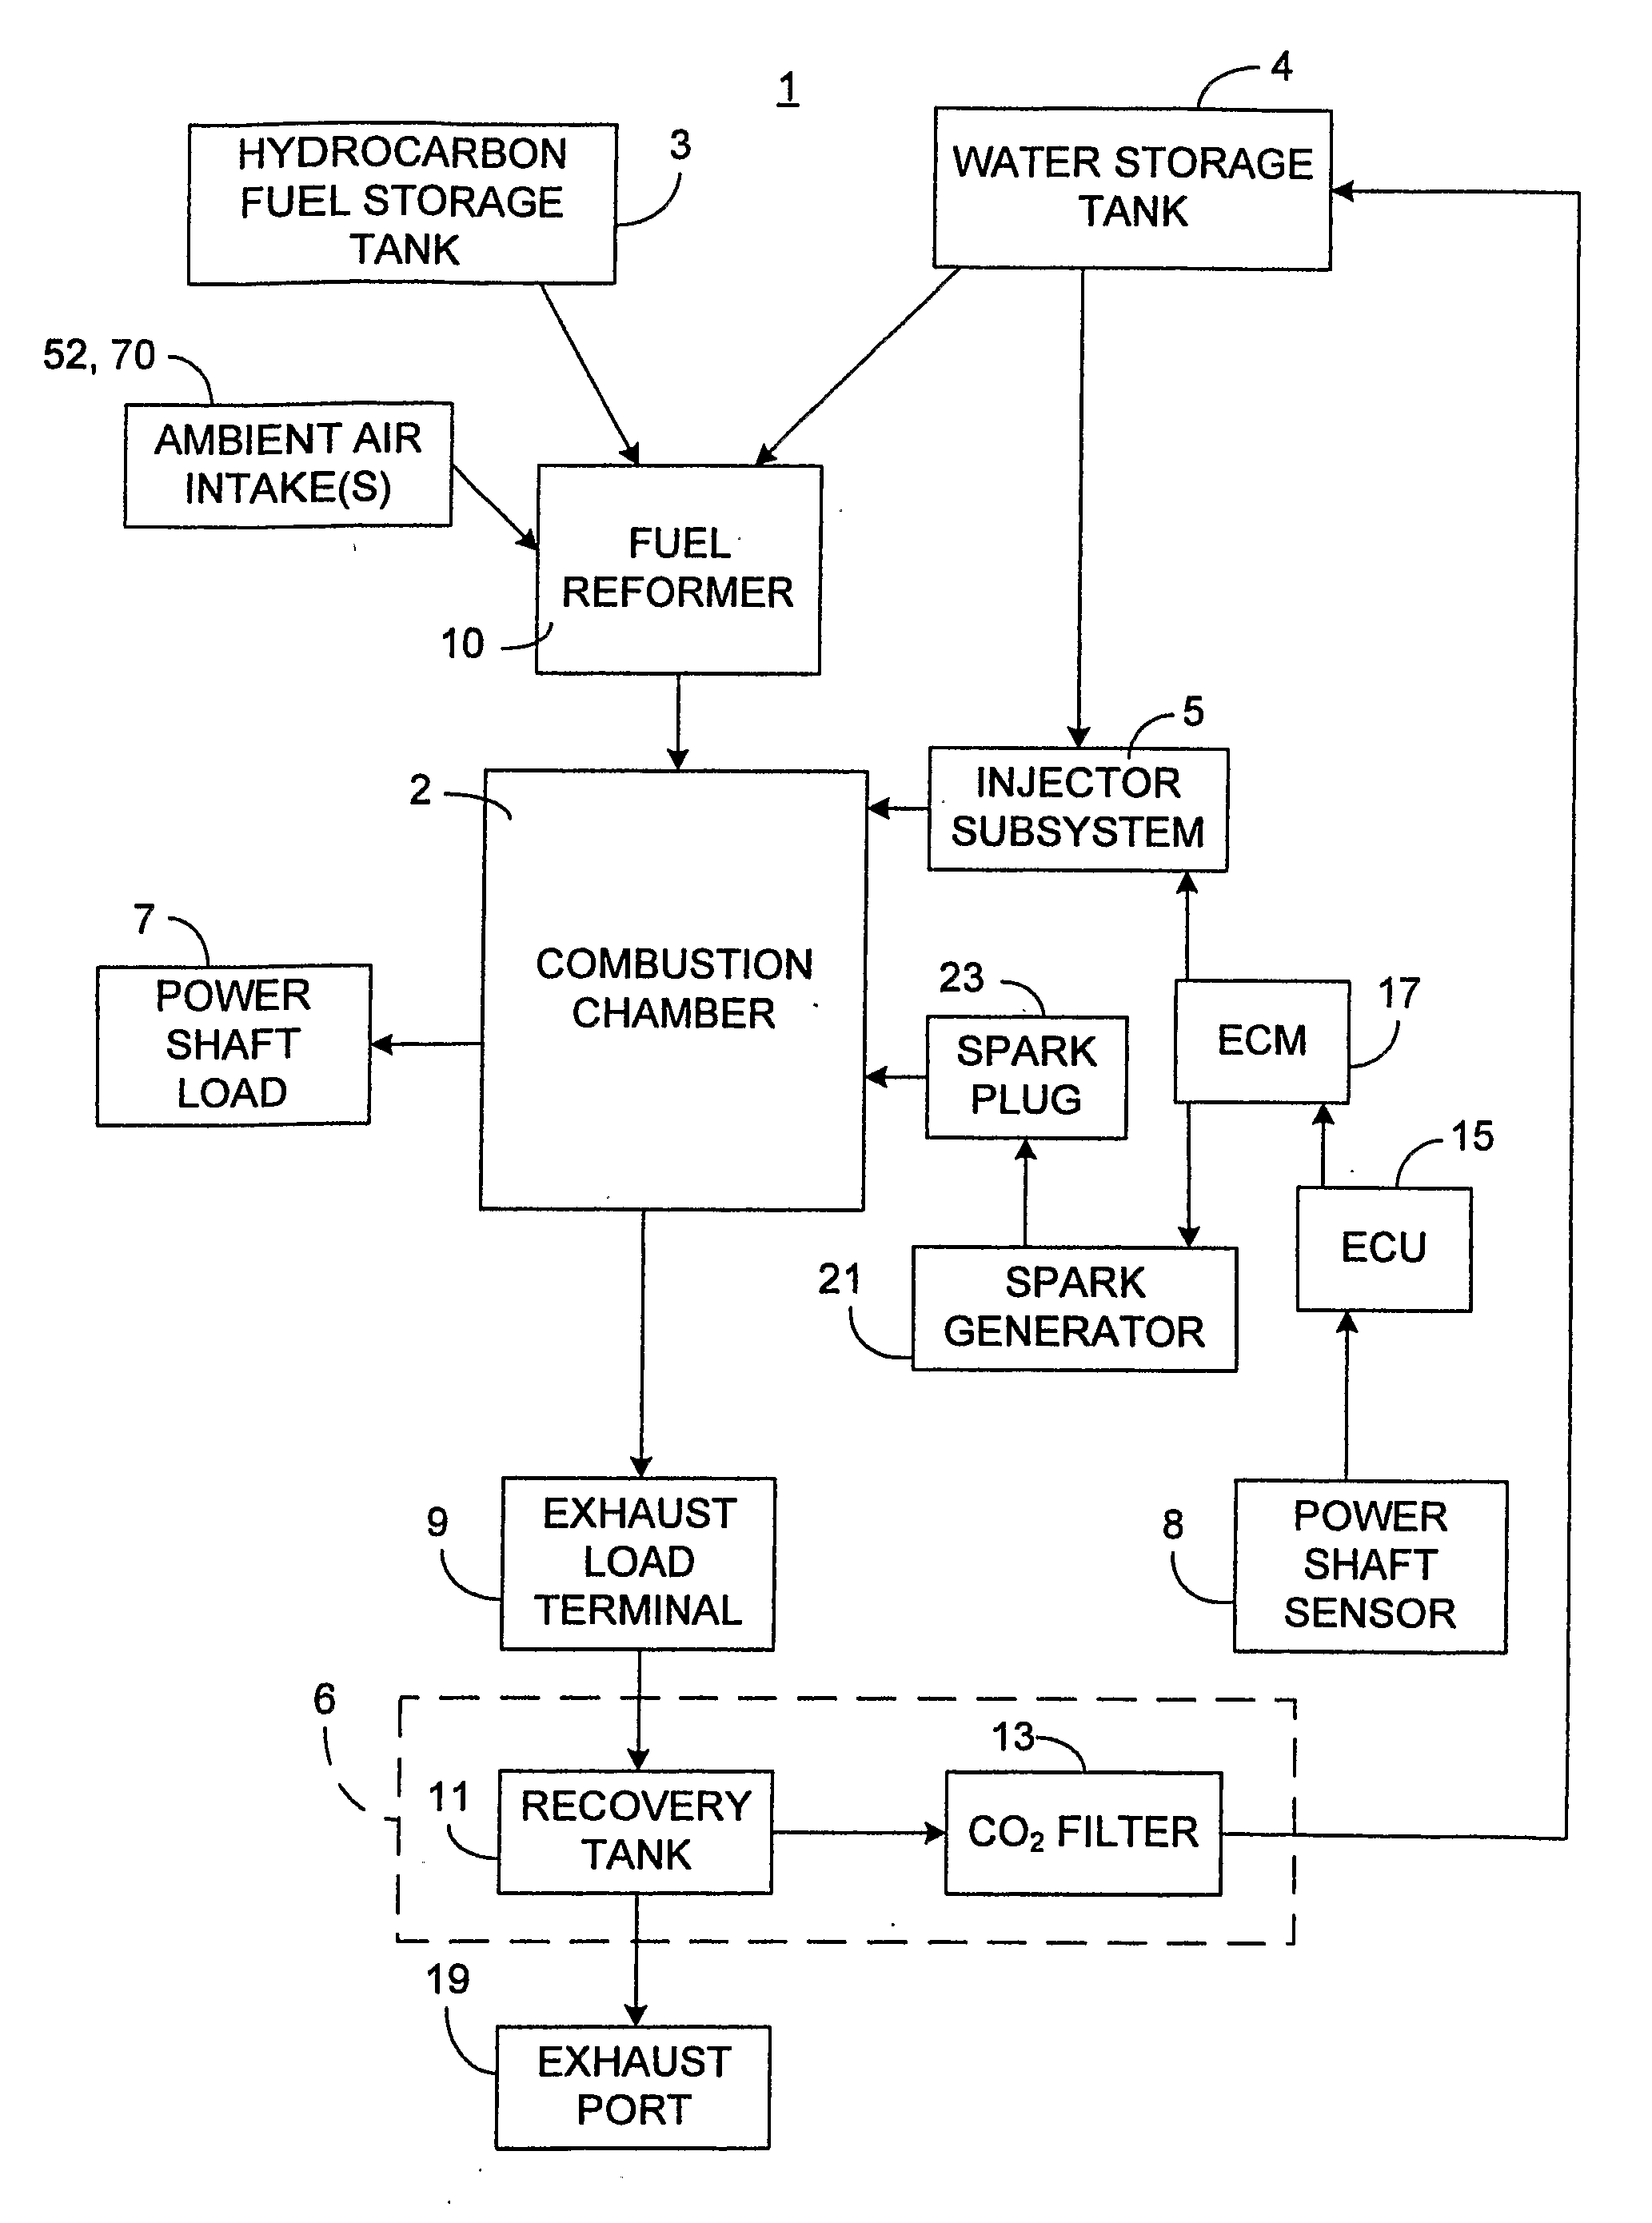 Fuel Supply System for a Vehicle Including a Vaporization Device for Converting Fuel and Water into Hydrogen